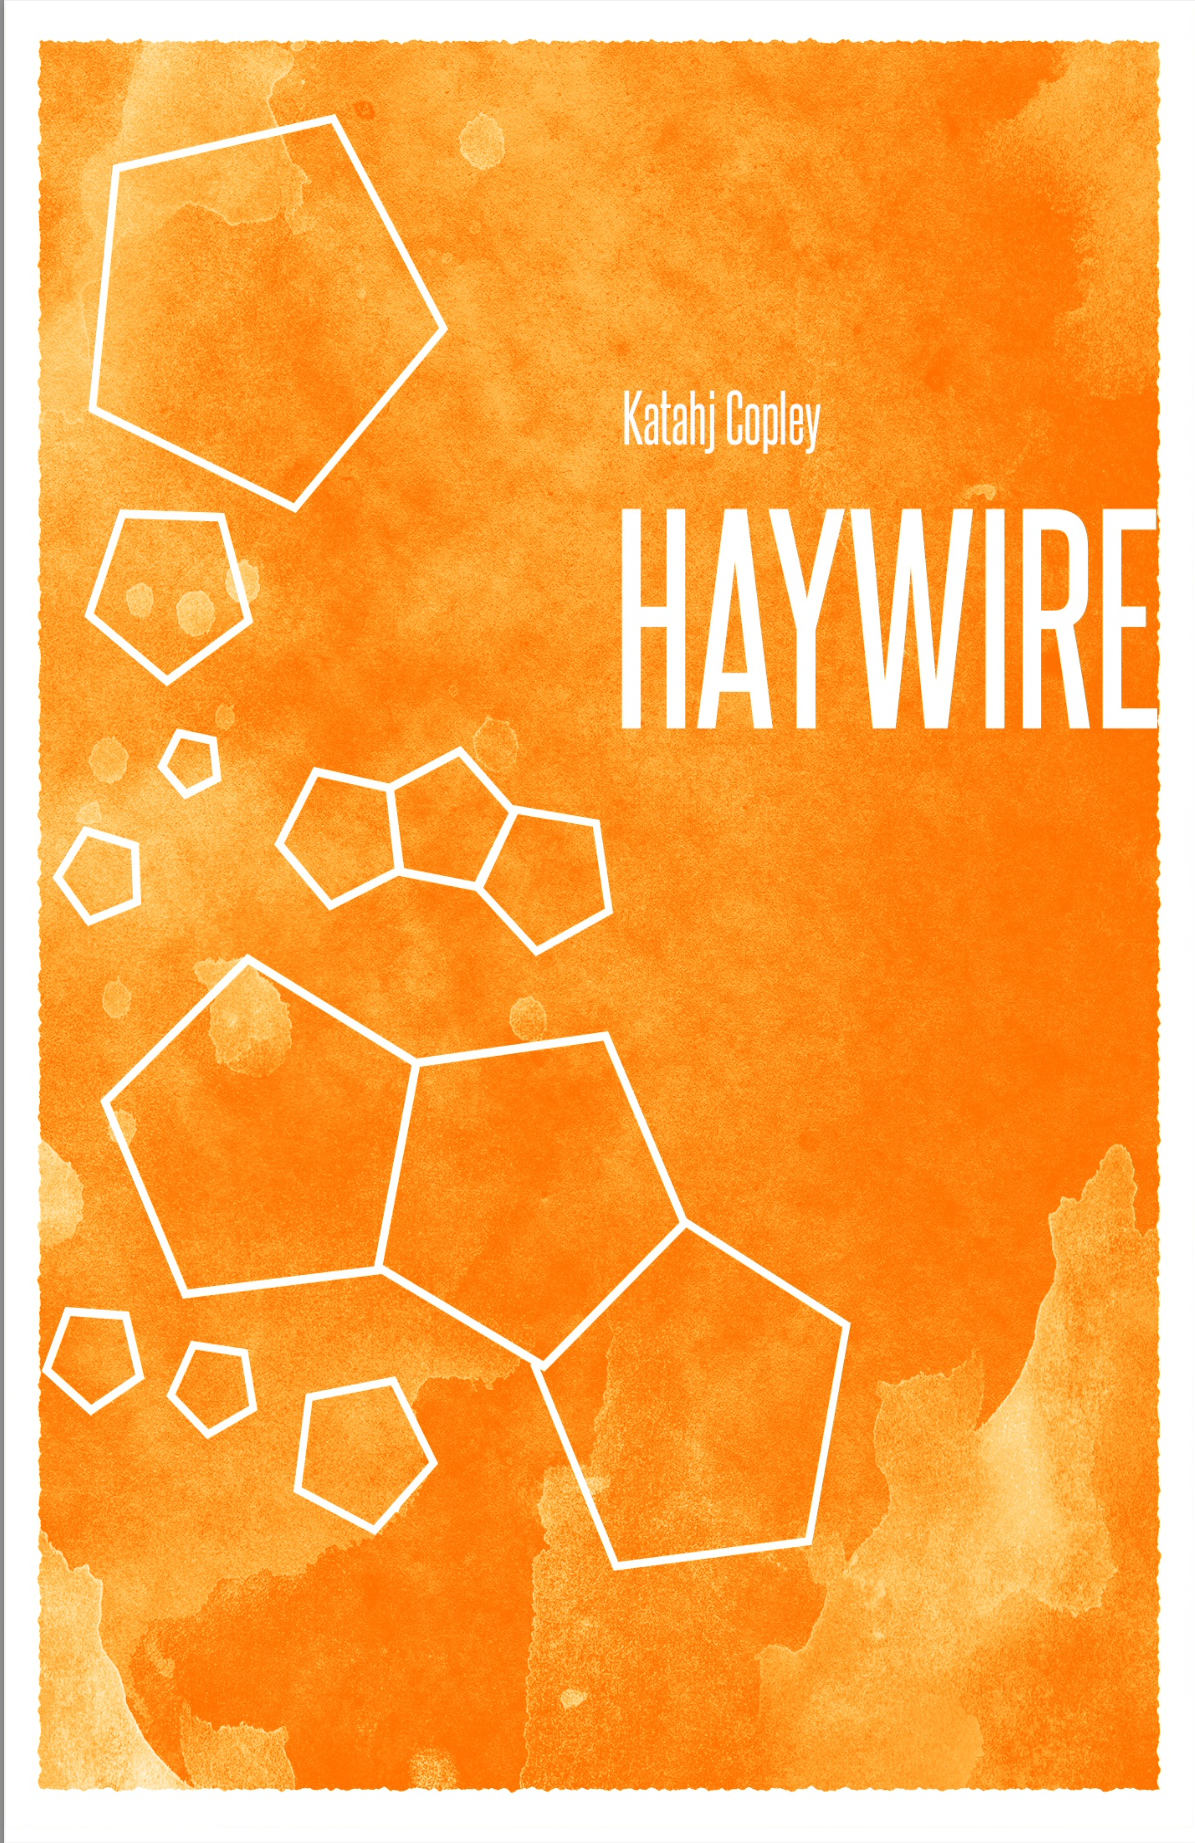 Haywire (Score Only) by Katahj Copley